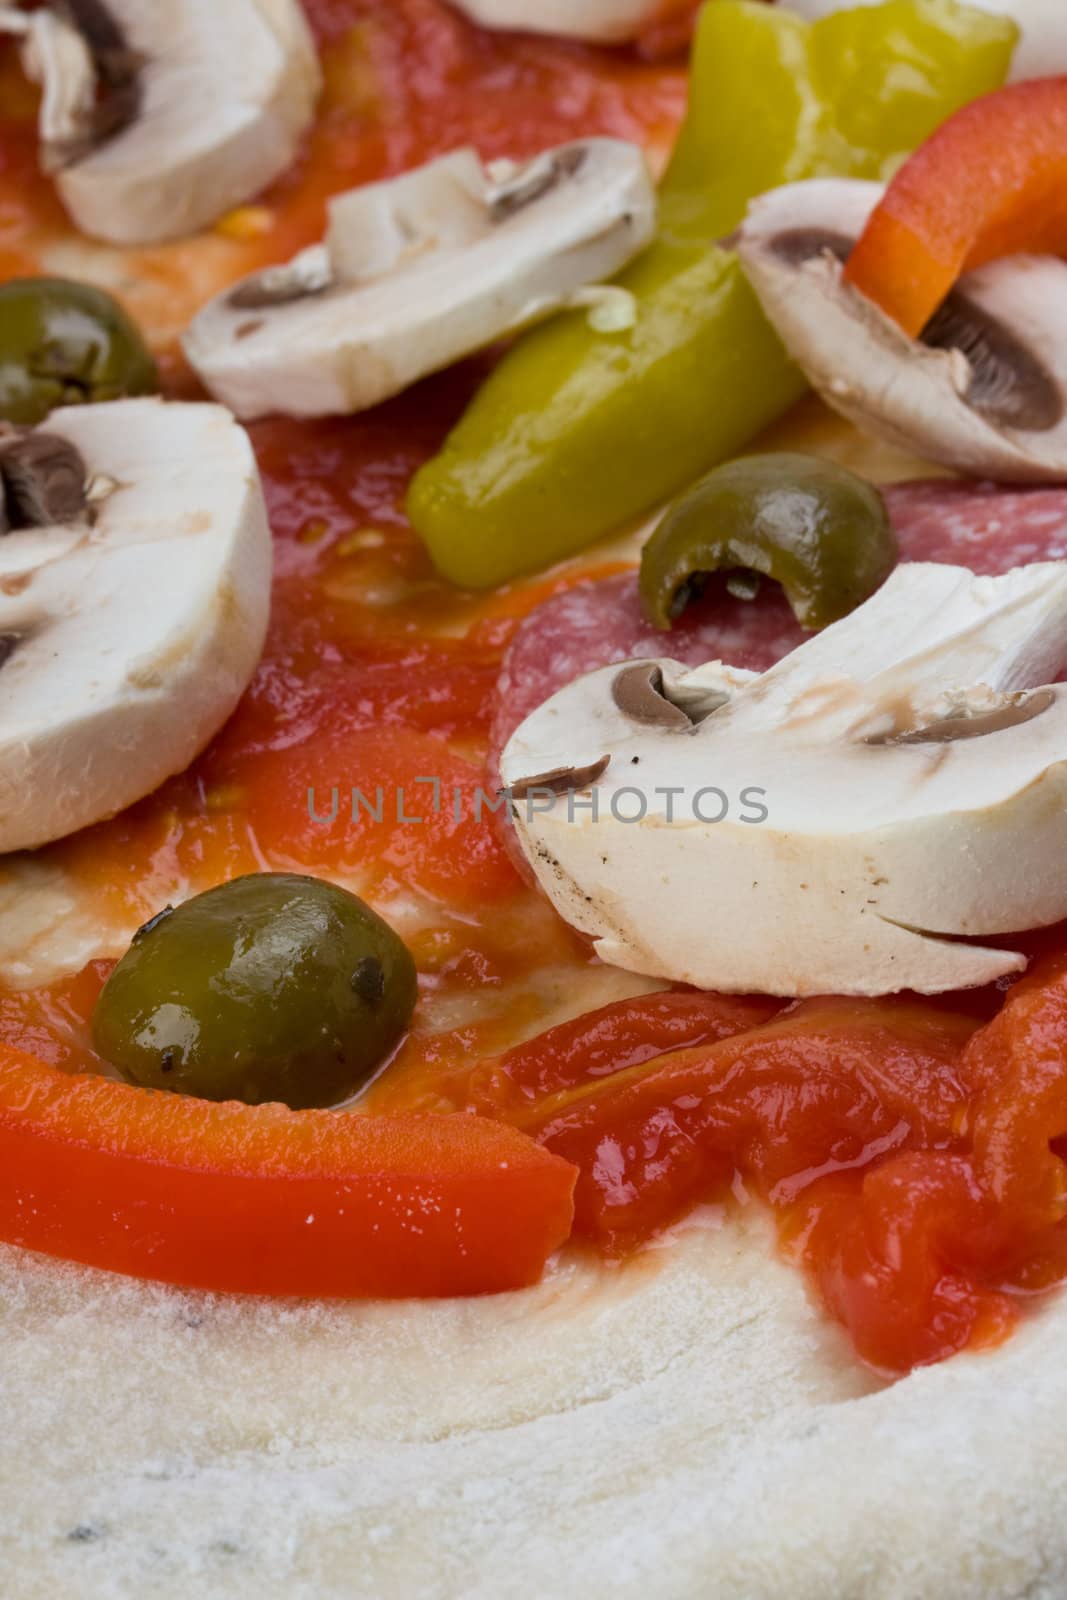 unbaked pizza prepared to bake on a wooden board by bernjuer